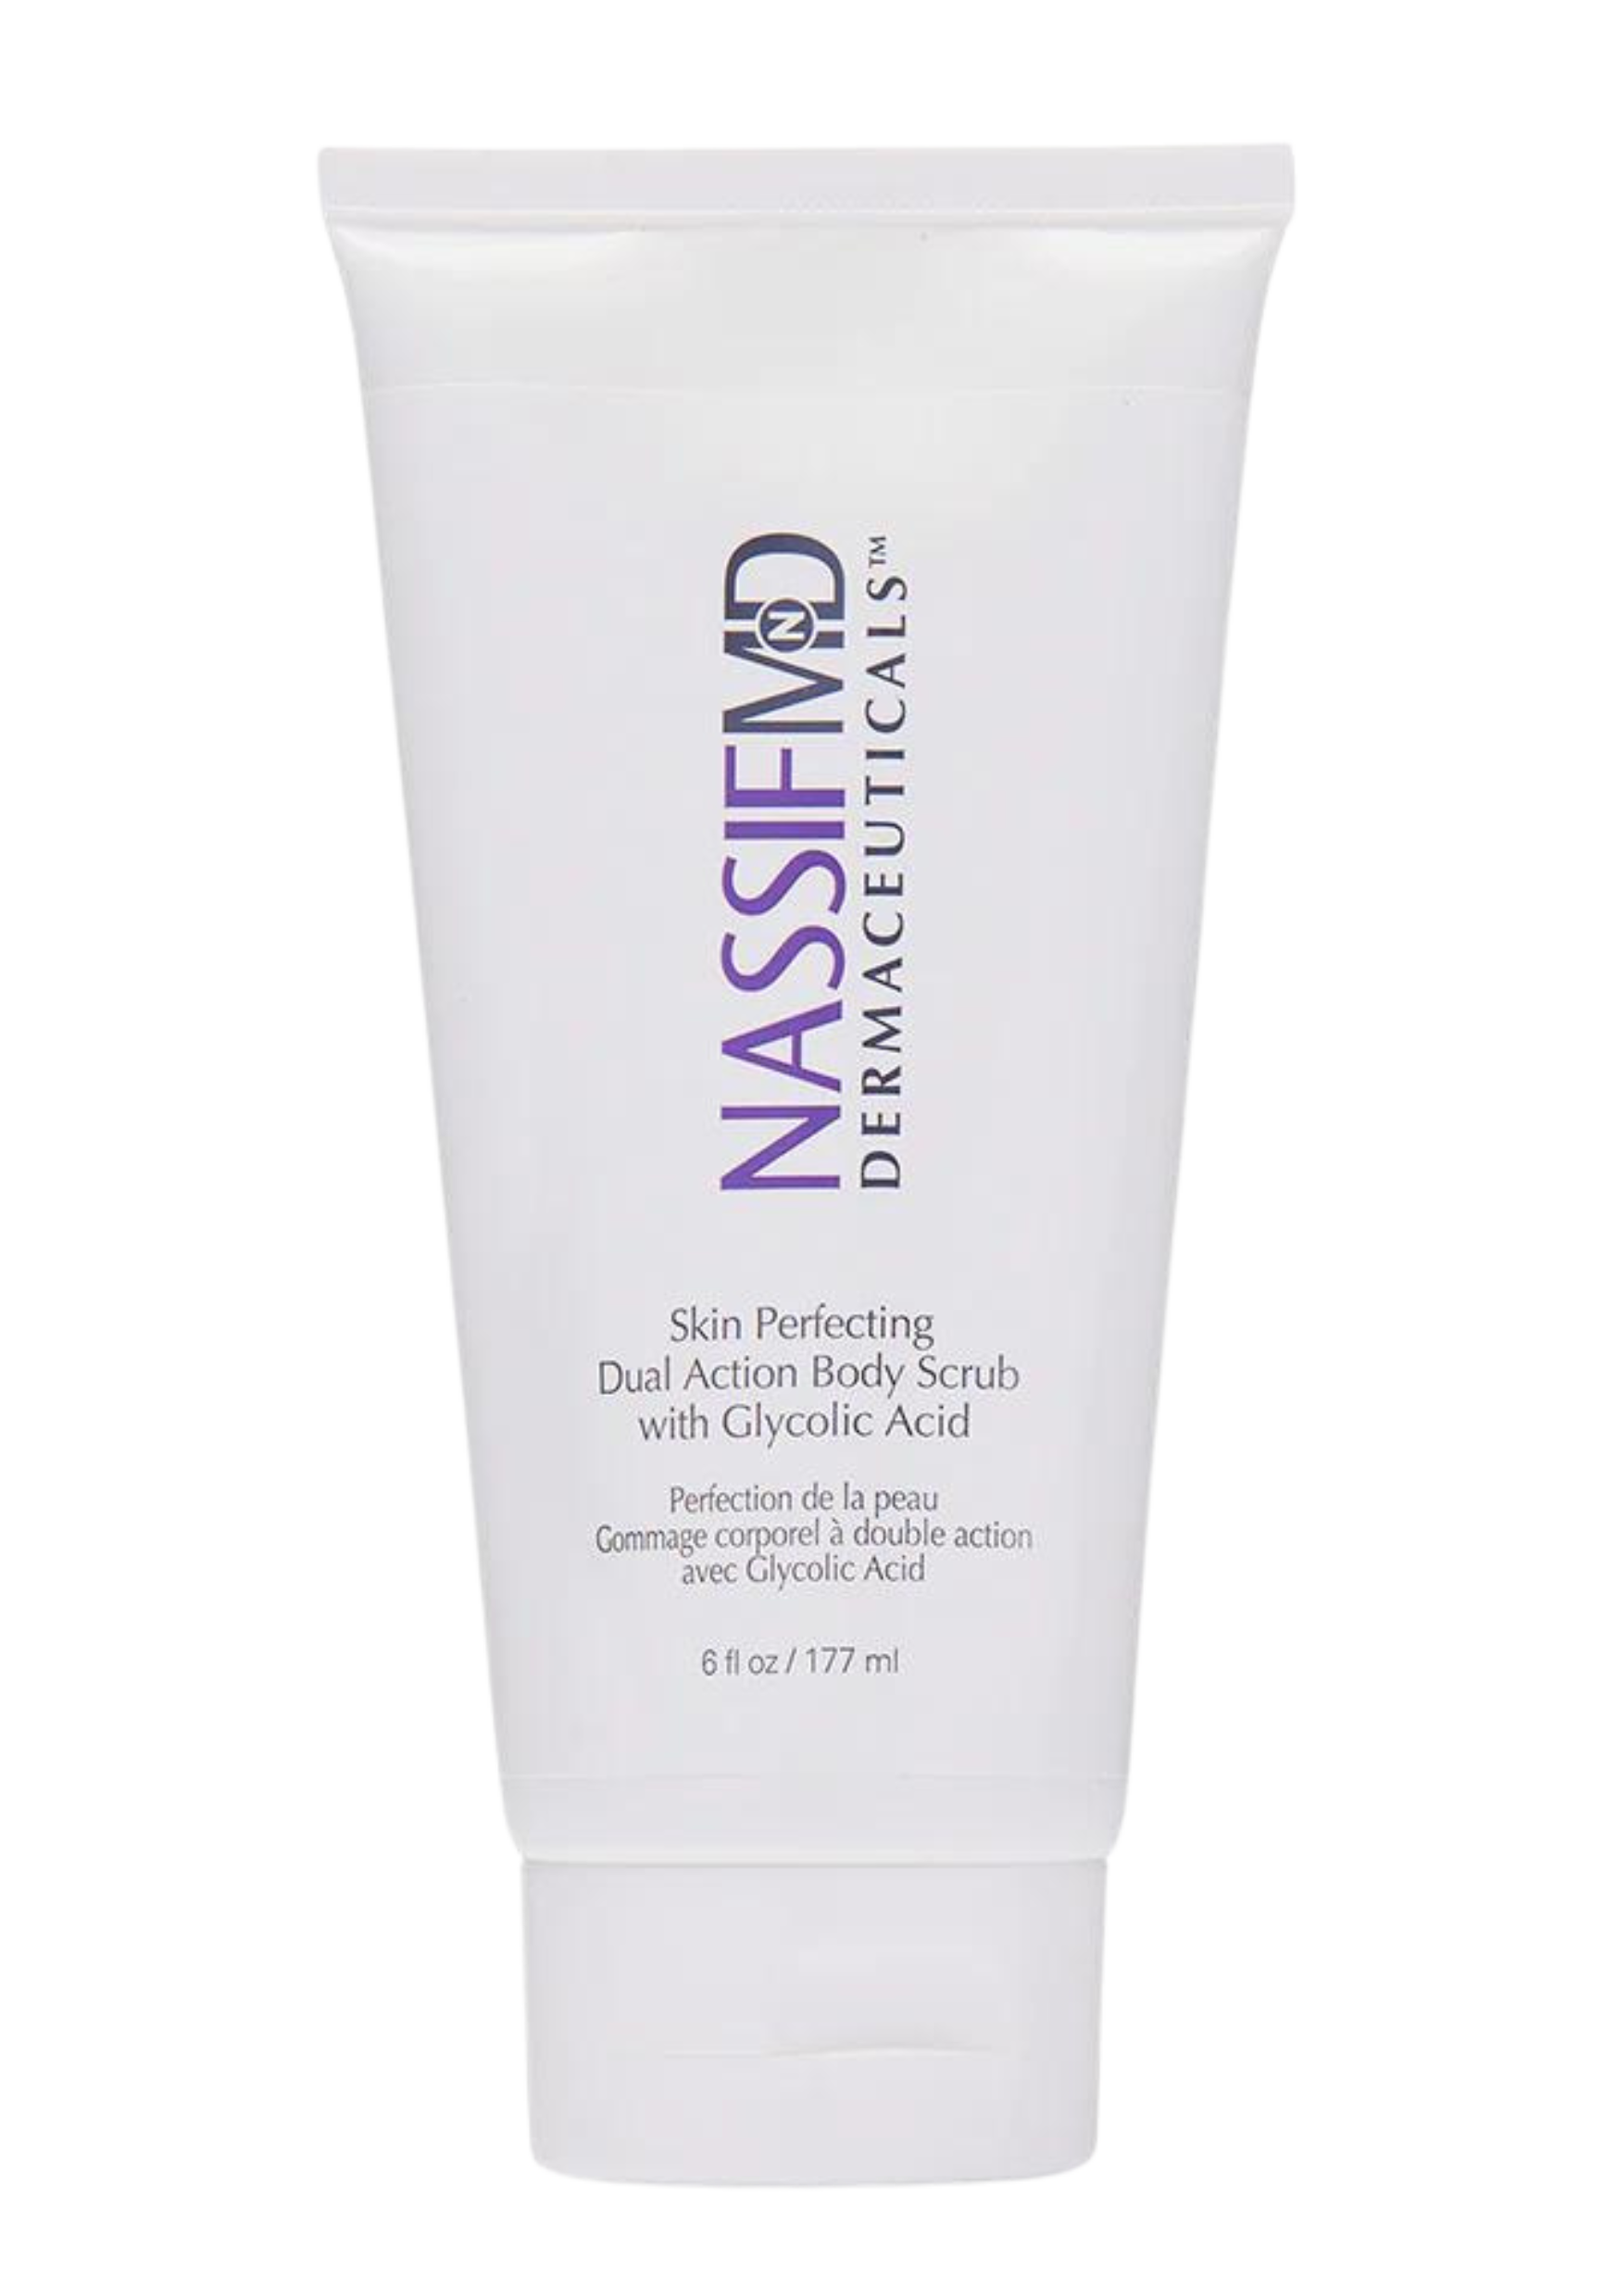 Nassif MD® Skin Perfecting Dual Action Face & Body Scrub